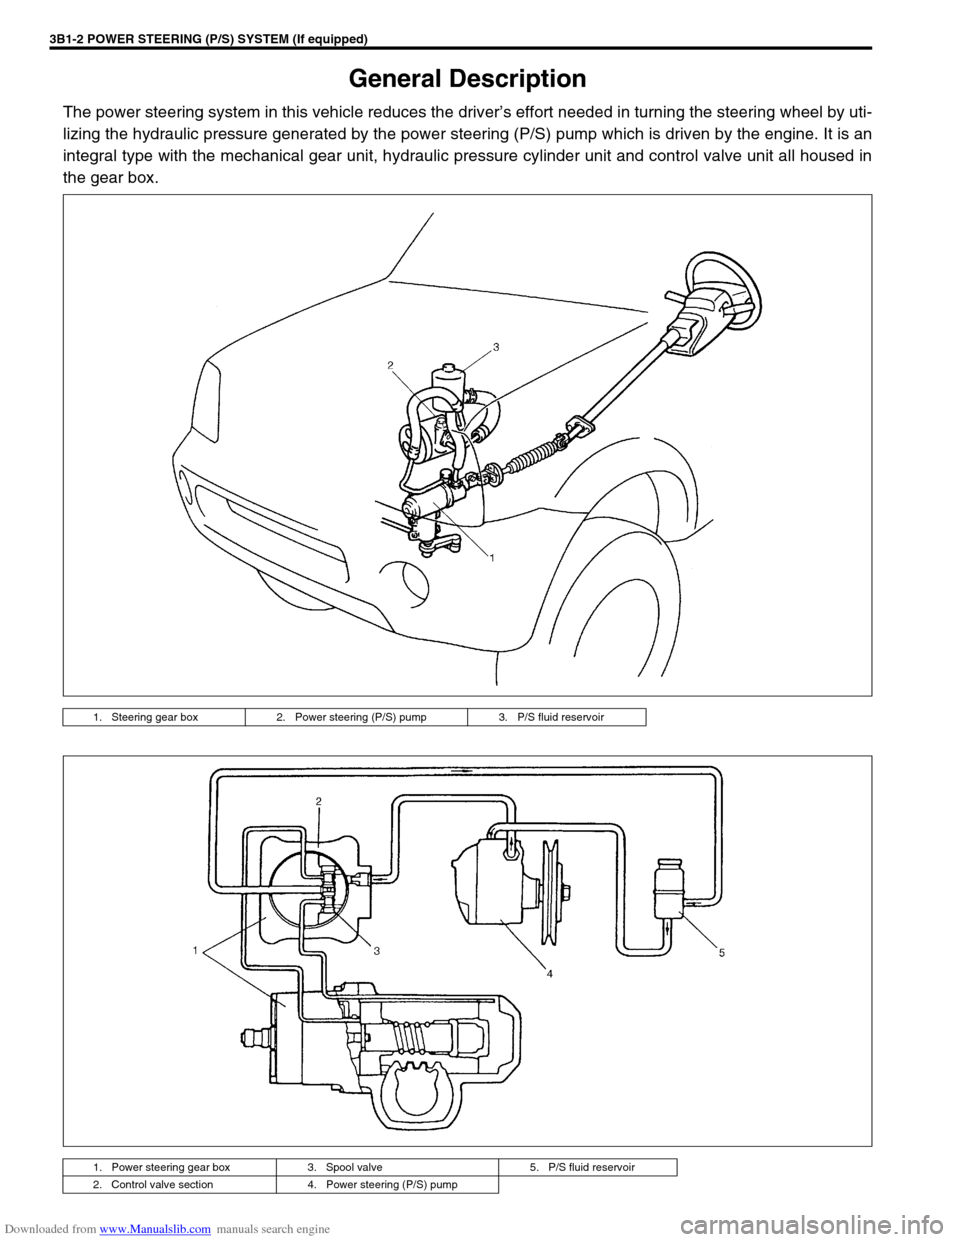 SUZUKI JIMNY 2005 3.G Service Workshop Manual Downloaded from www.Manualslib.com manuals search engine 3B1-2 POWER STEERING (P/S) SYSTEM (If equipped)
General Description
The power steering system in this vehicle reduces the driver’s effort nee